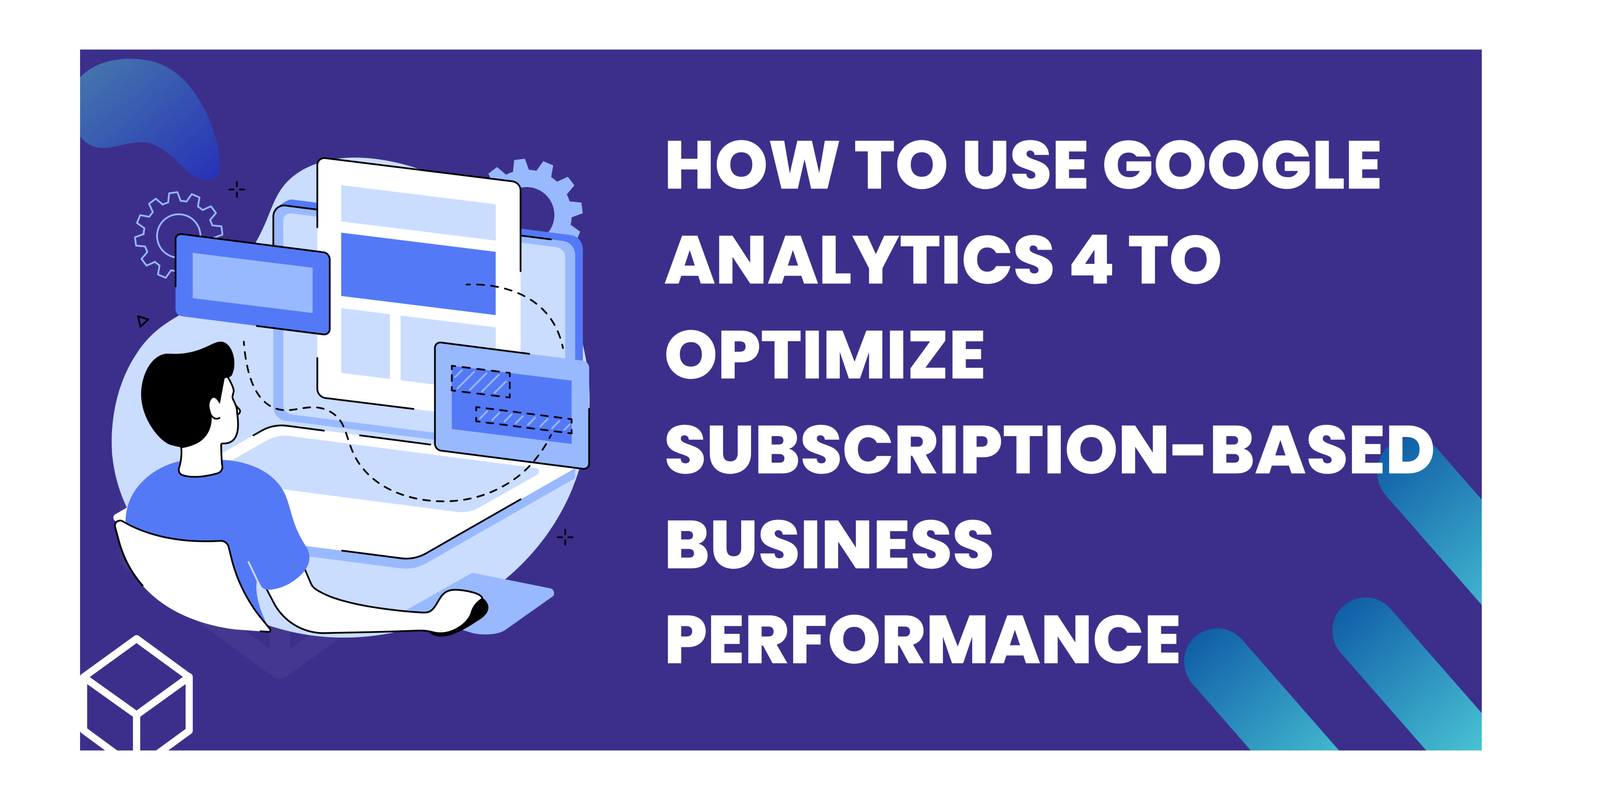 How to Use Google Analytics 4 to Optimize Subscription-based Business Performance